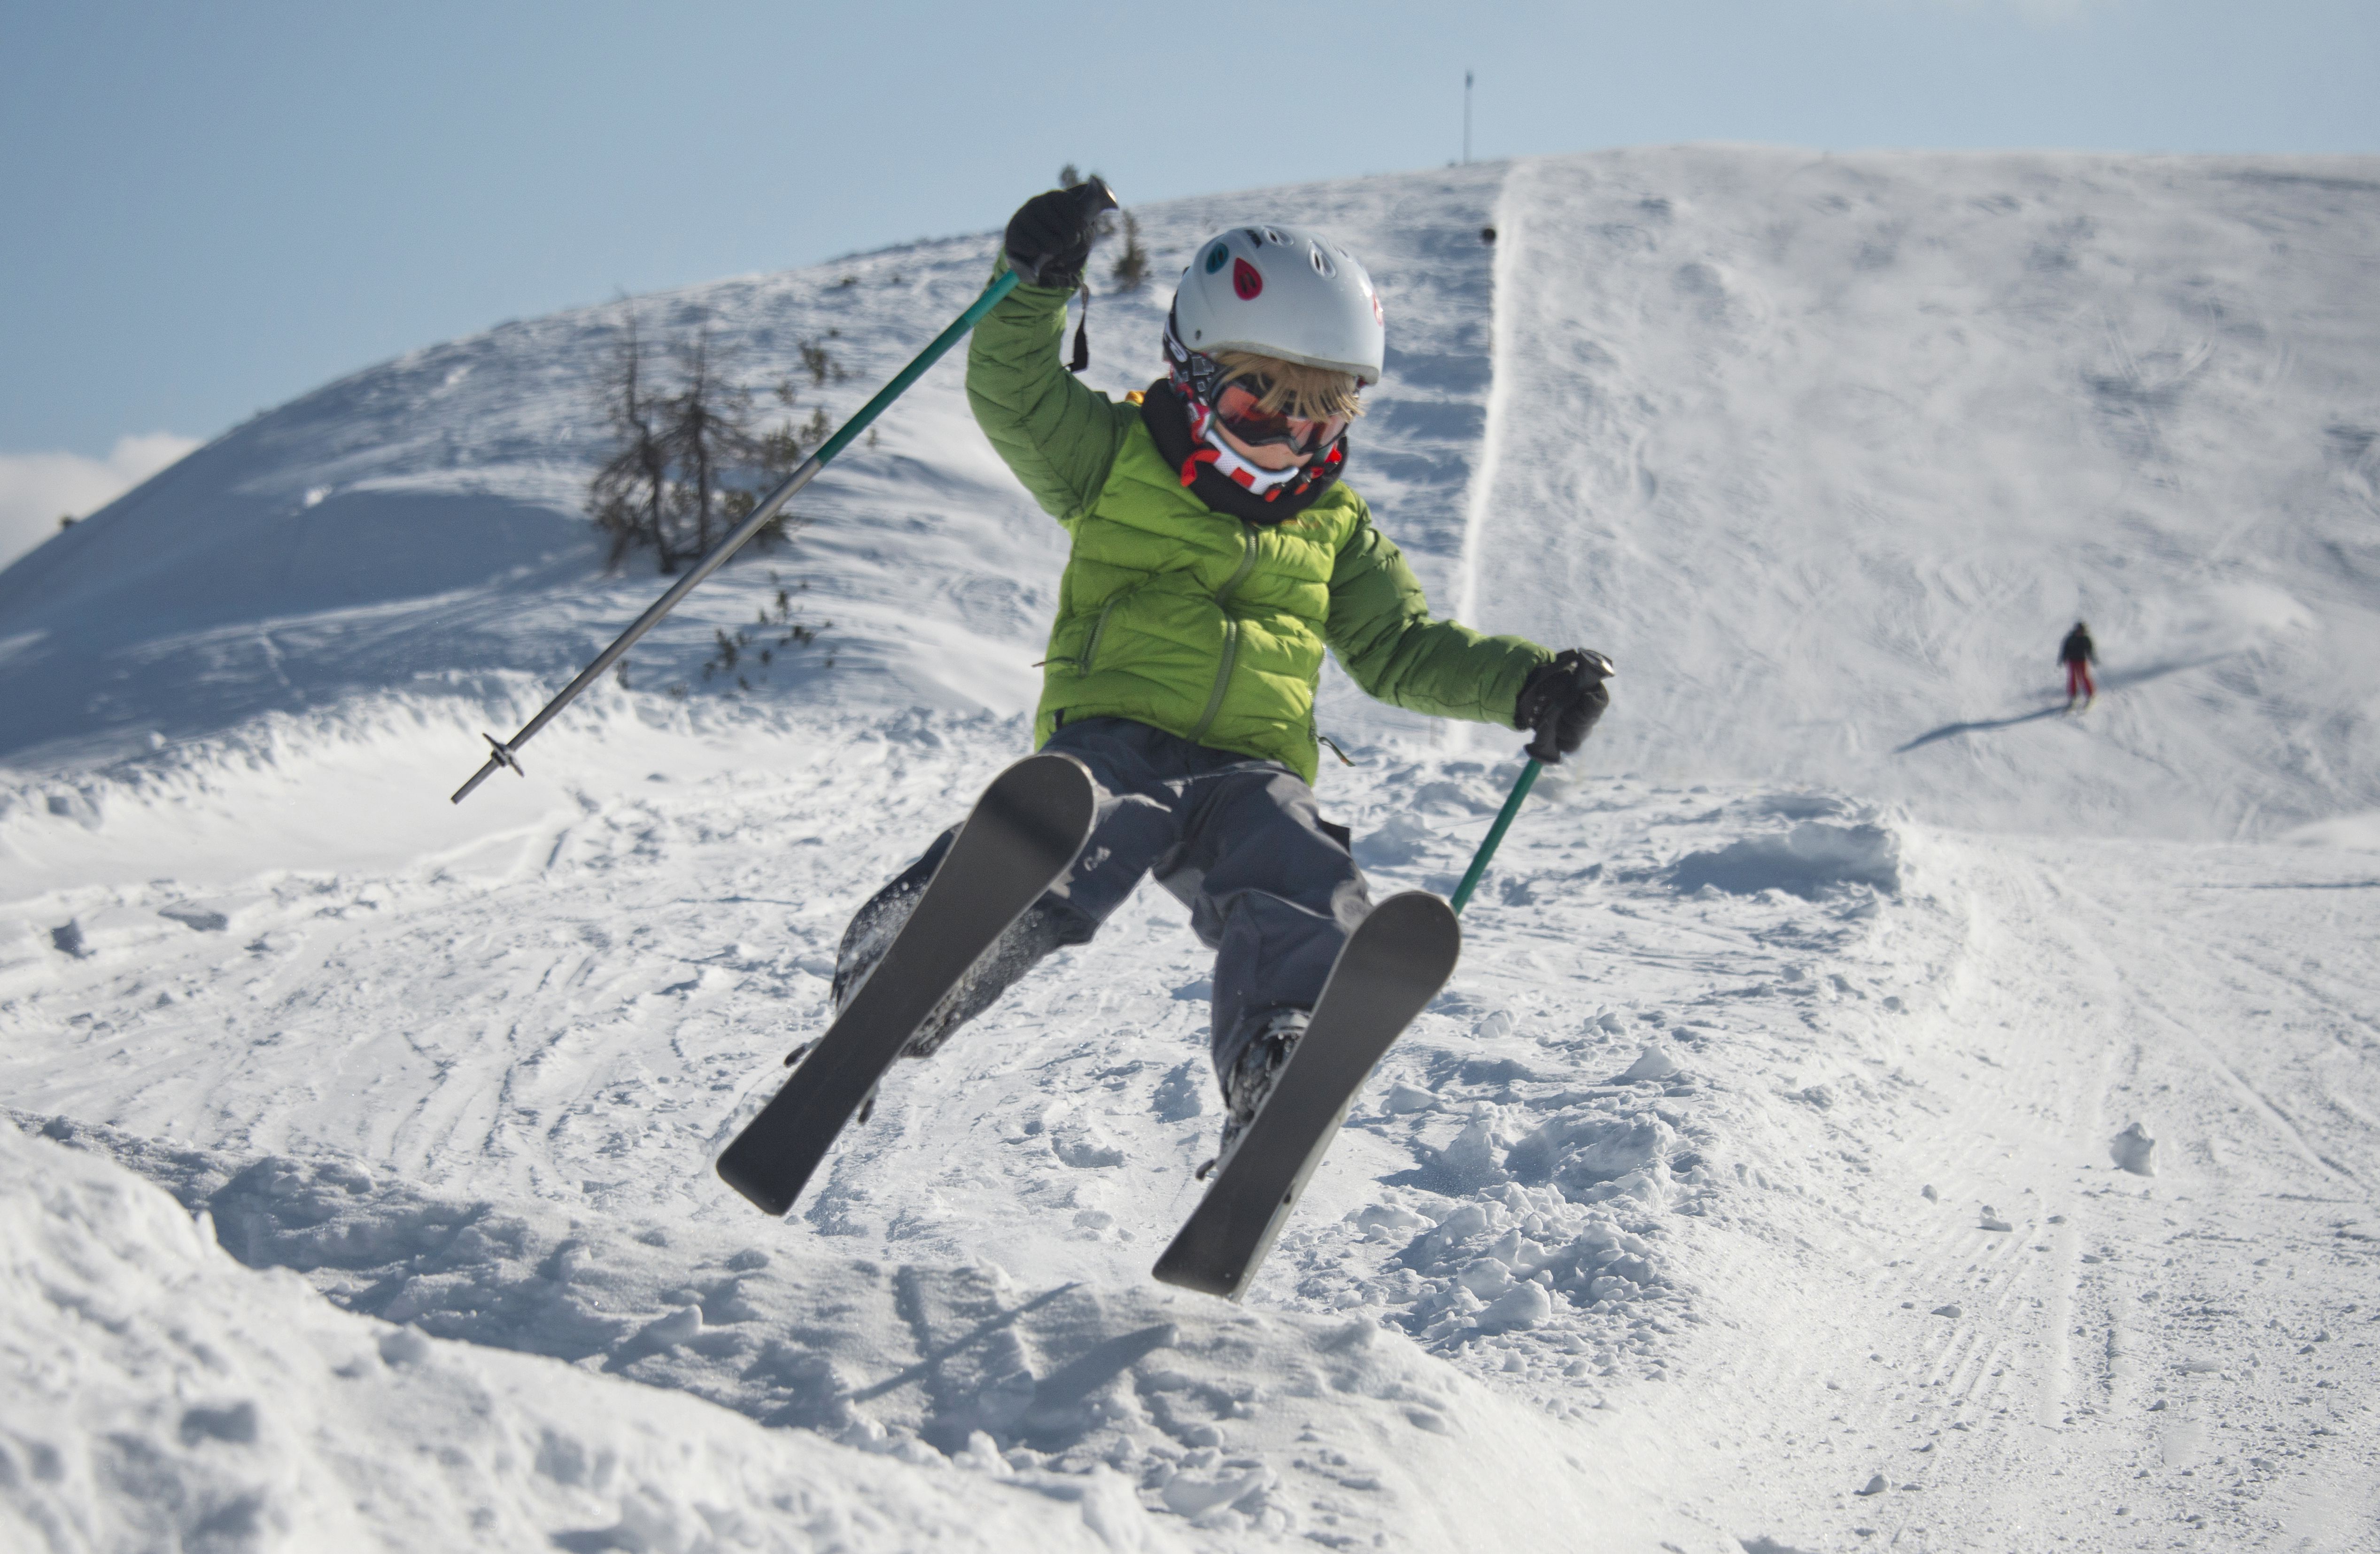 Tips for Learning How to Ski